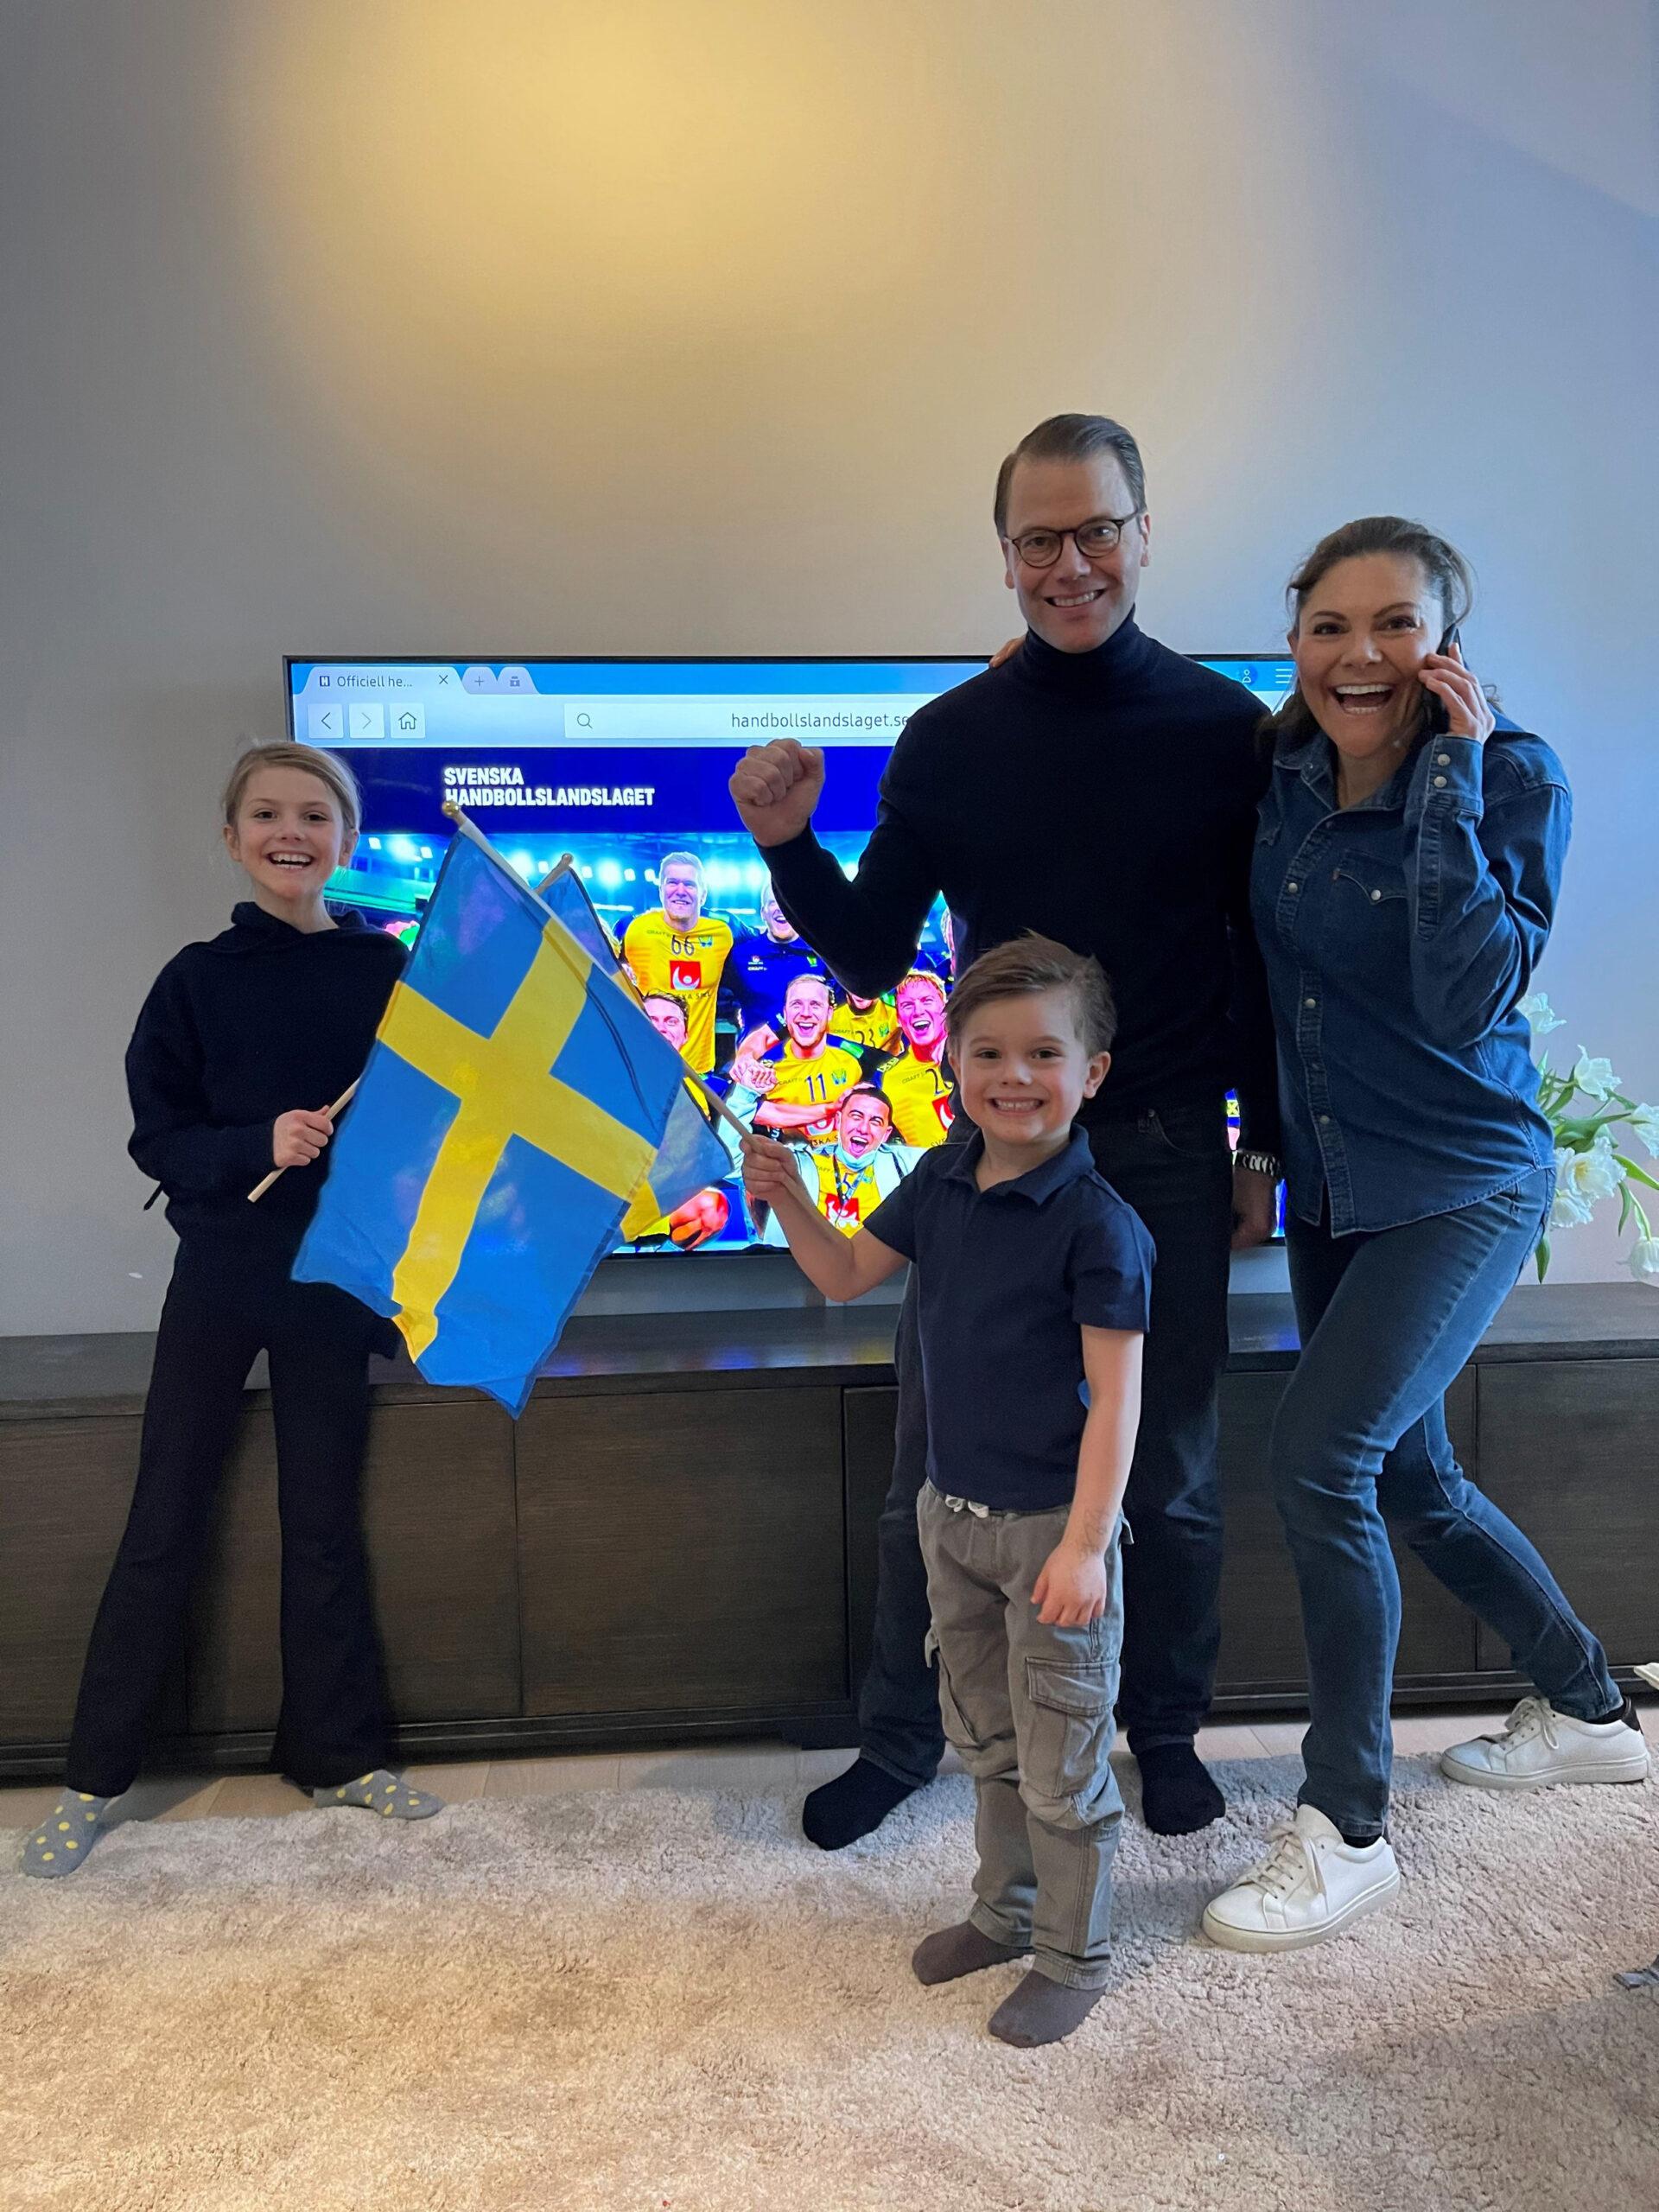 The Crown Princess family waving a flag in front of a telly.